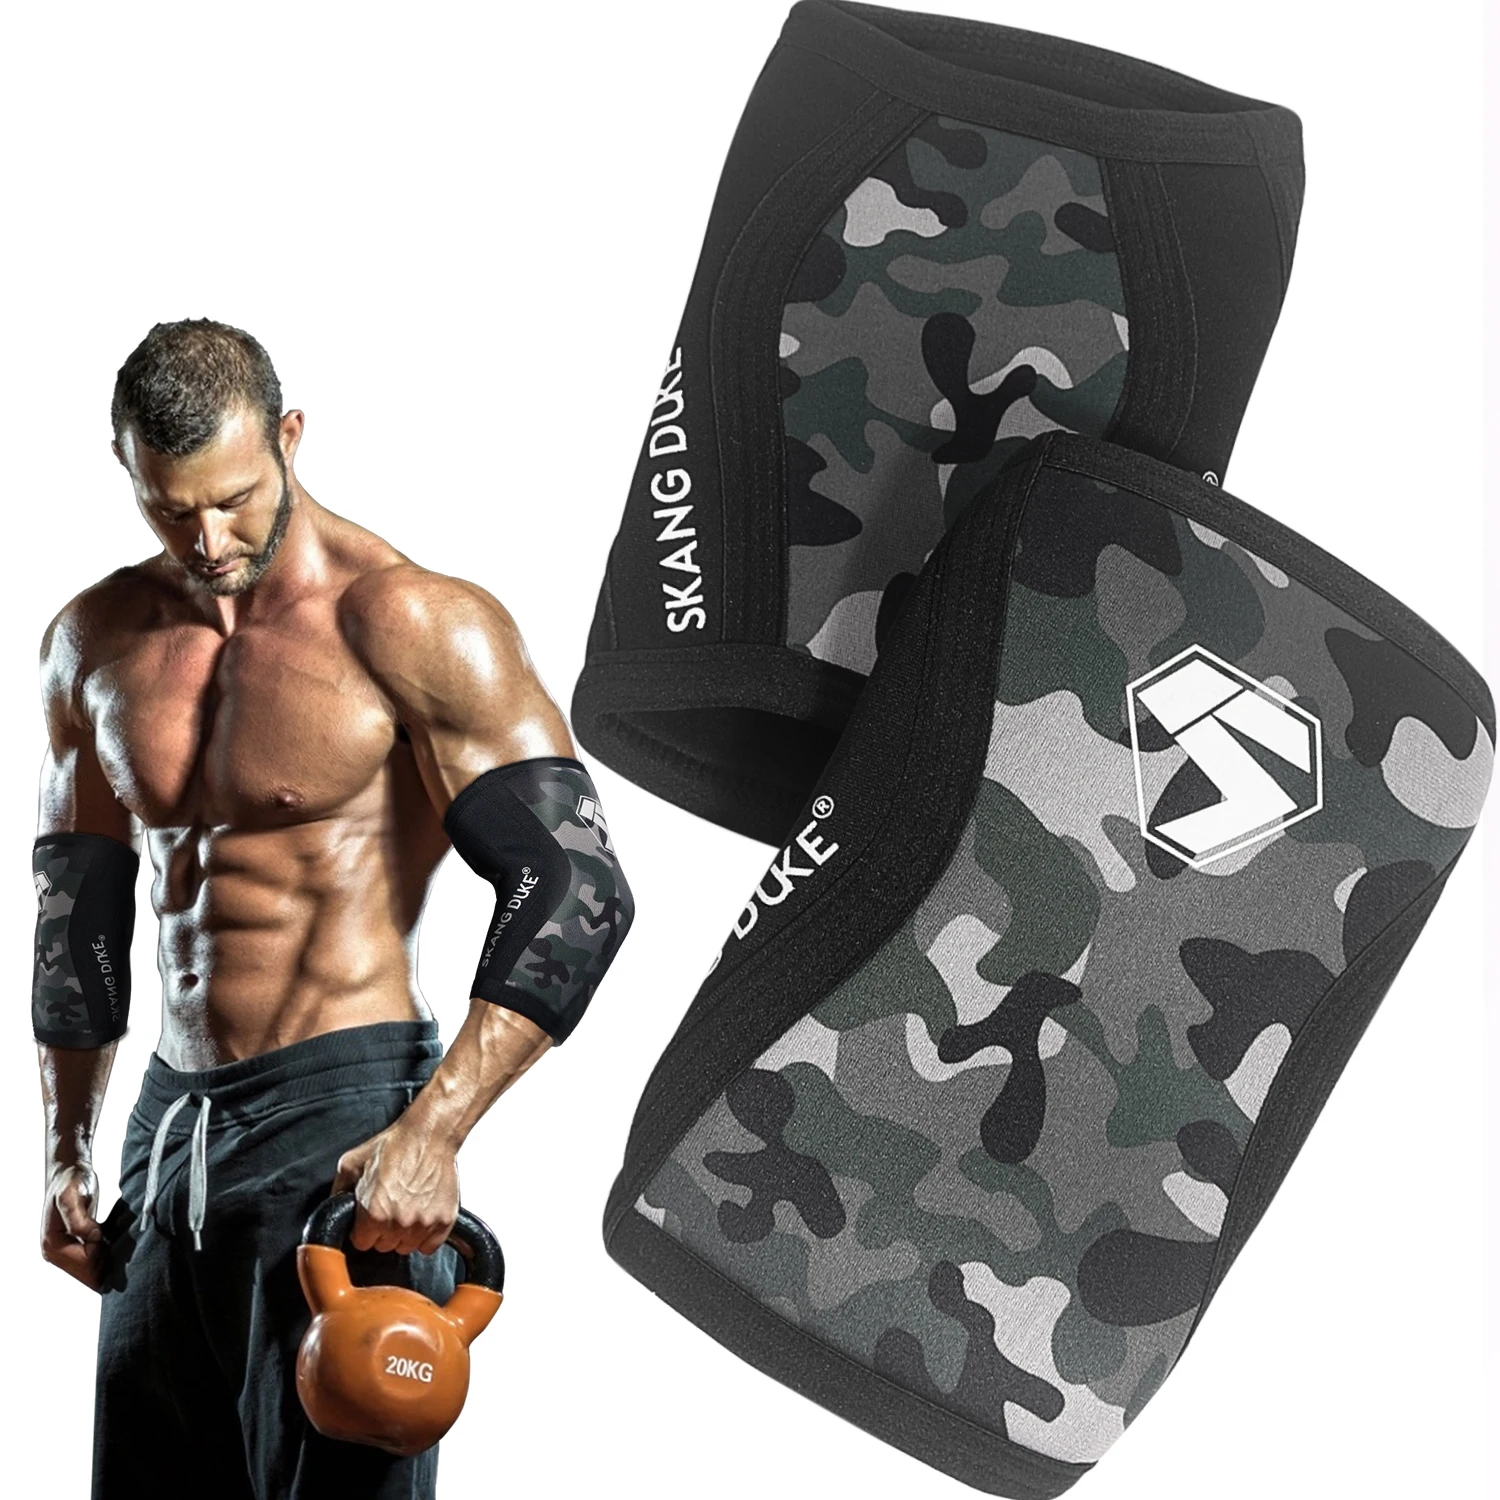 

Customized 7mm Neoprene Weightlifting Crossfit Powerlifting Elbow Brace Compression Support Sleeve, Camouflage